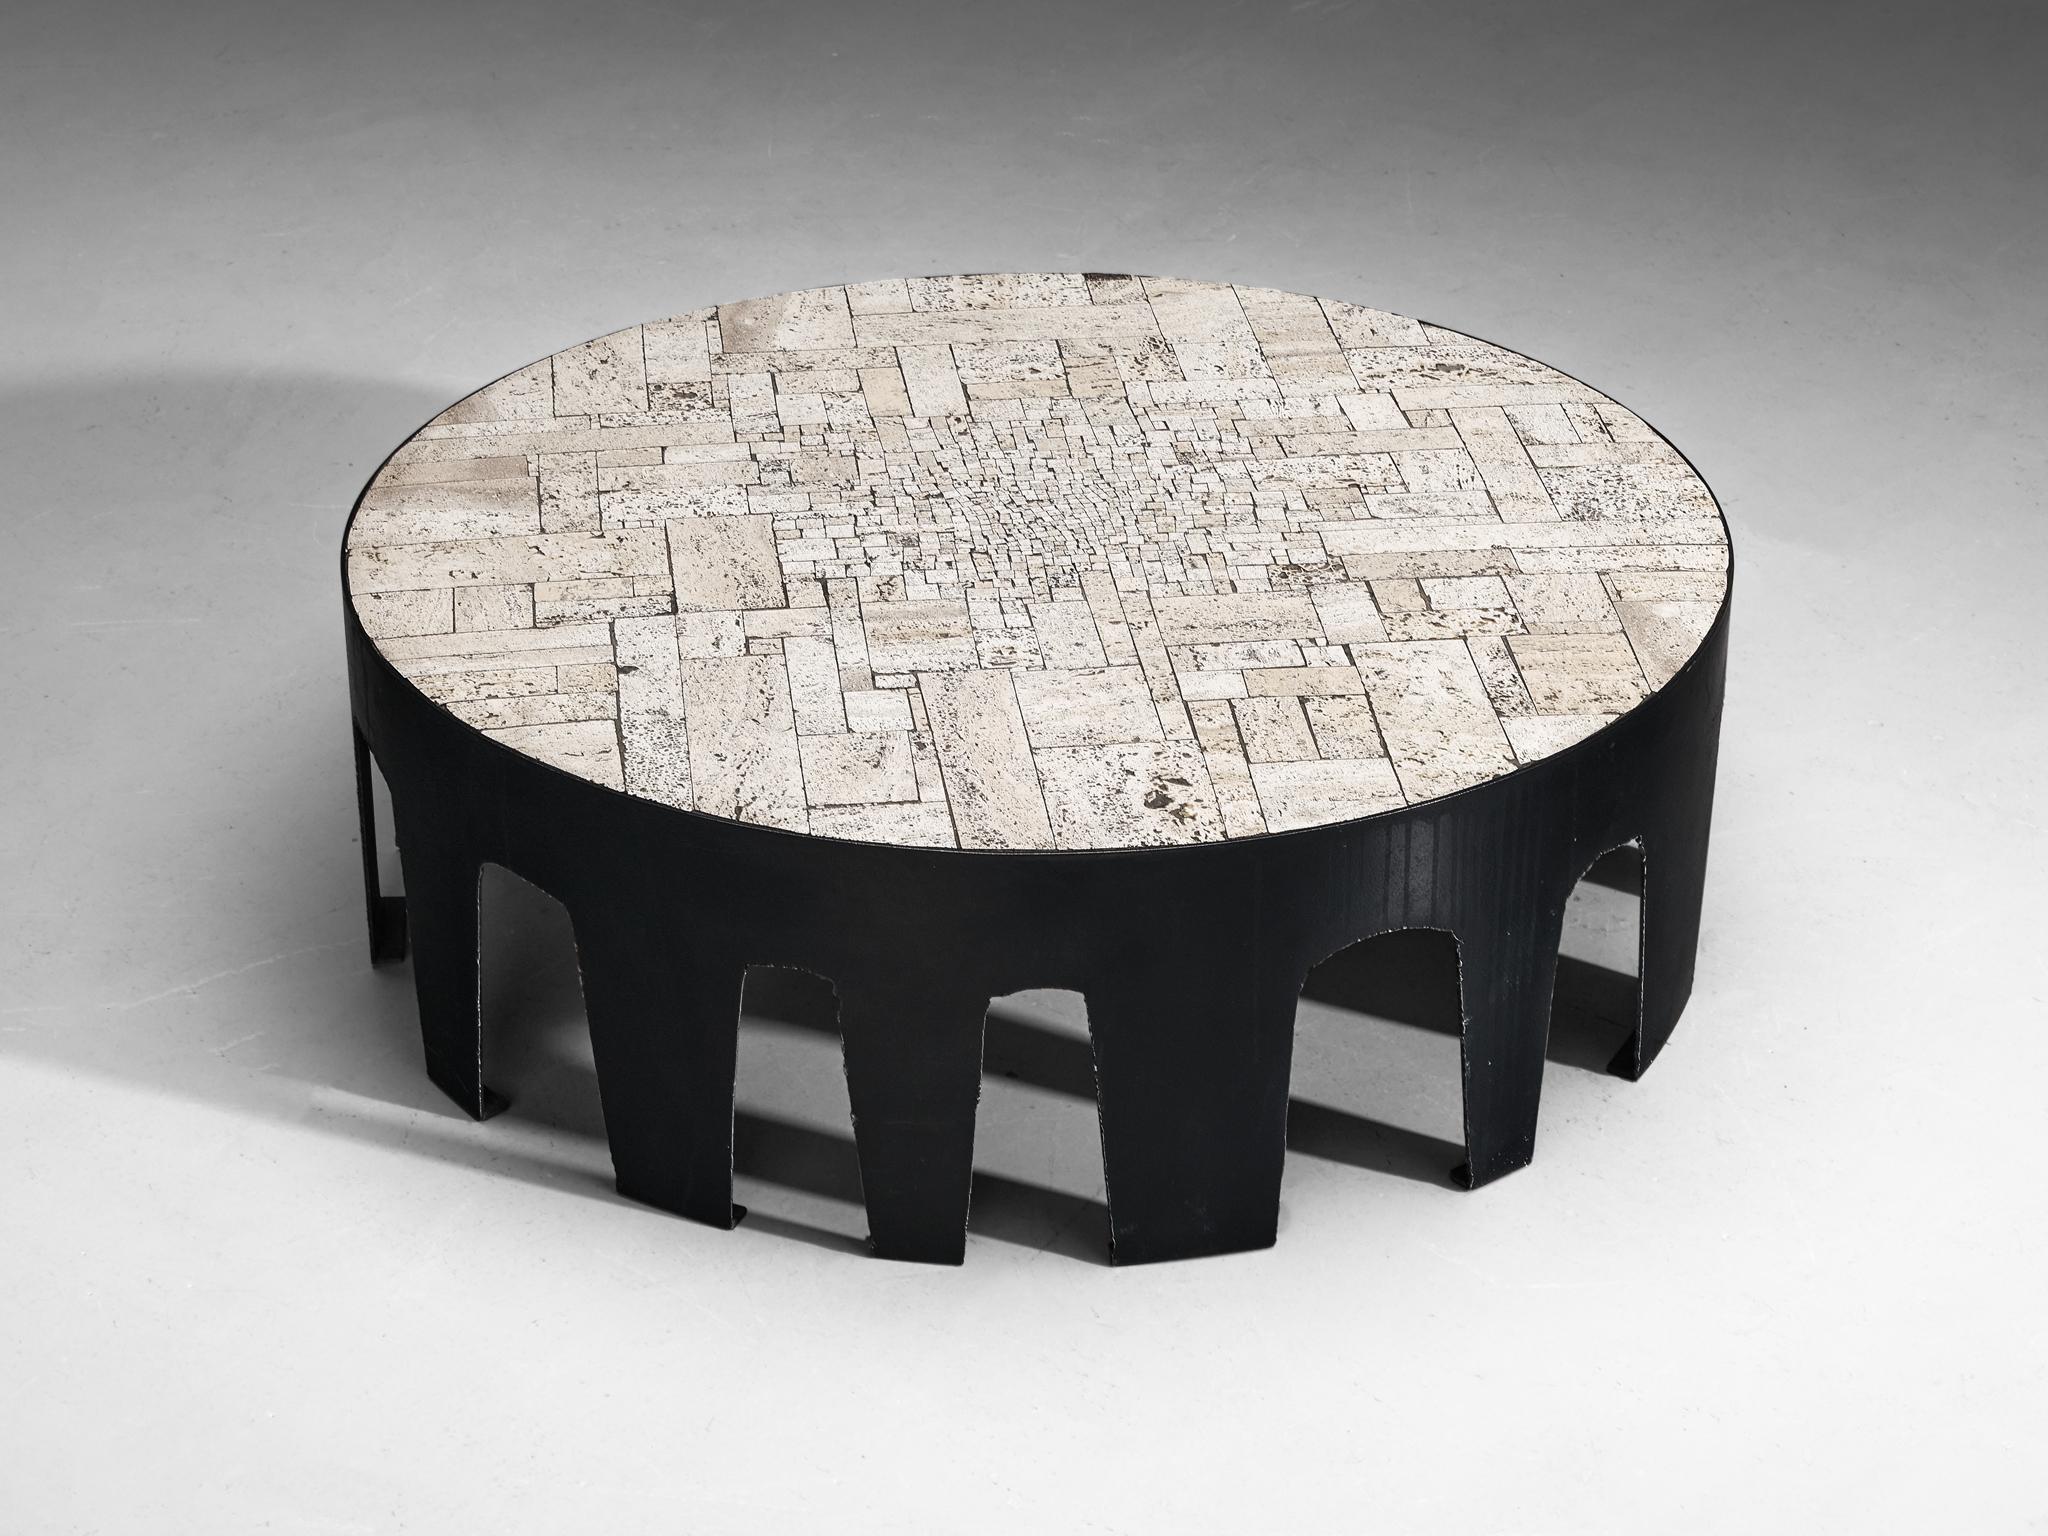 Pia Manu, coffee table, travertine, iron, Belgium, 1960s 

This unique, handmade piece is designed in the workshop of Pia Manu. Due to the artistic use of materials and texture combinations, the coffee table has a strong decorative character and